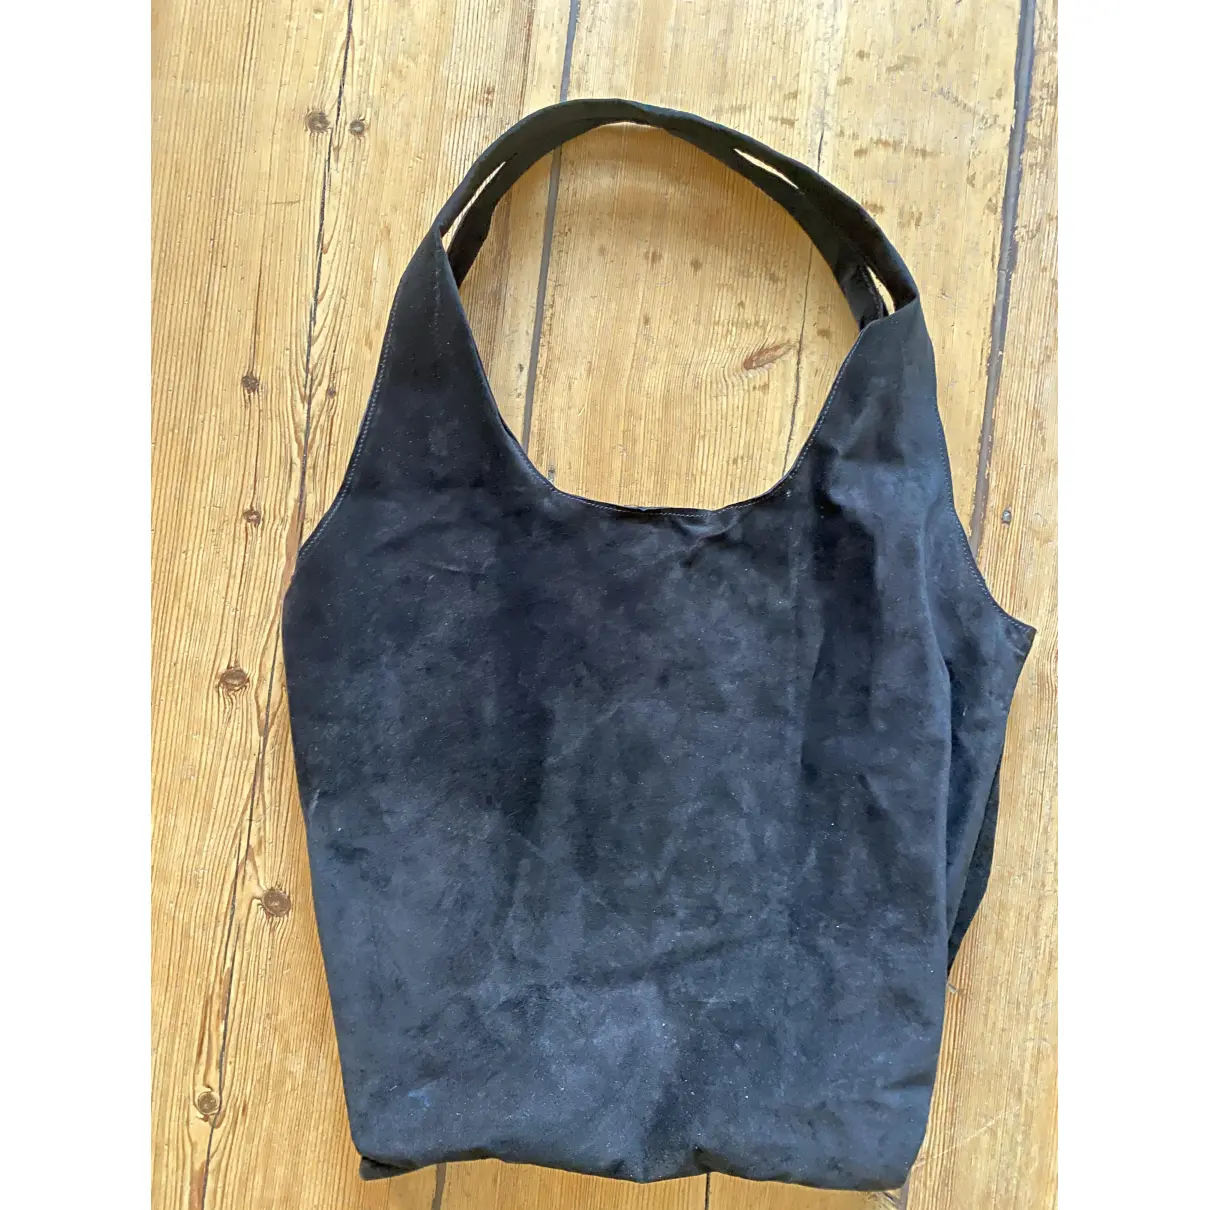 Buy Cynthia Vincent Leather tote online